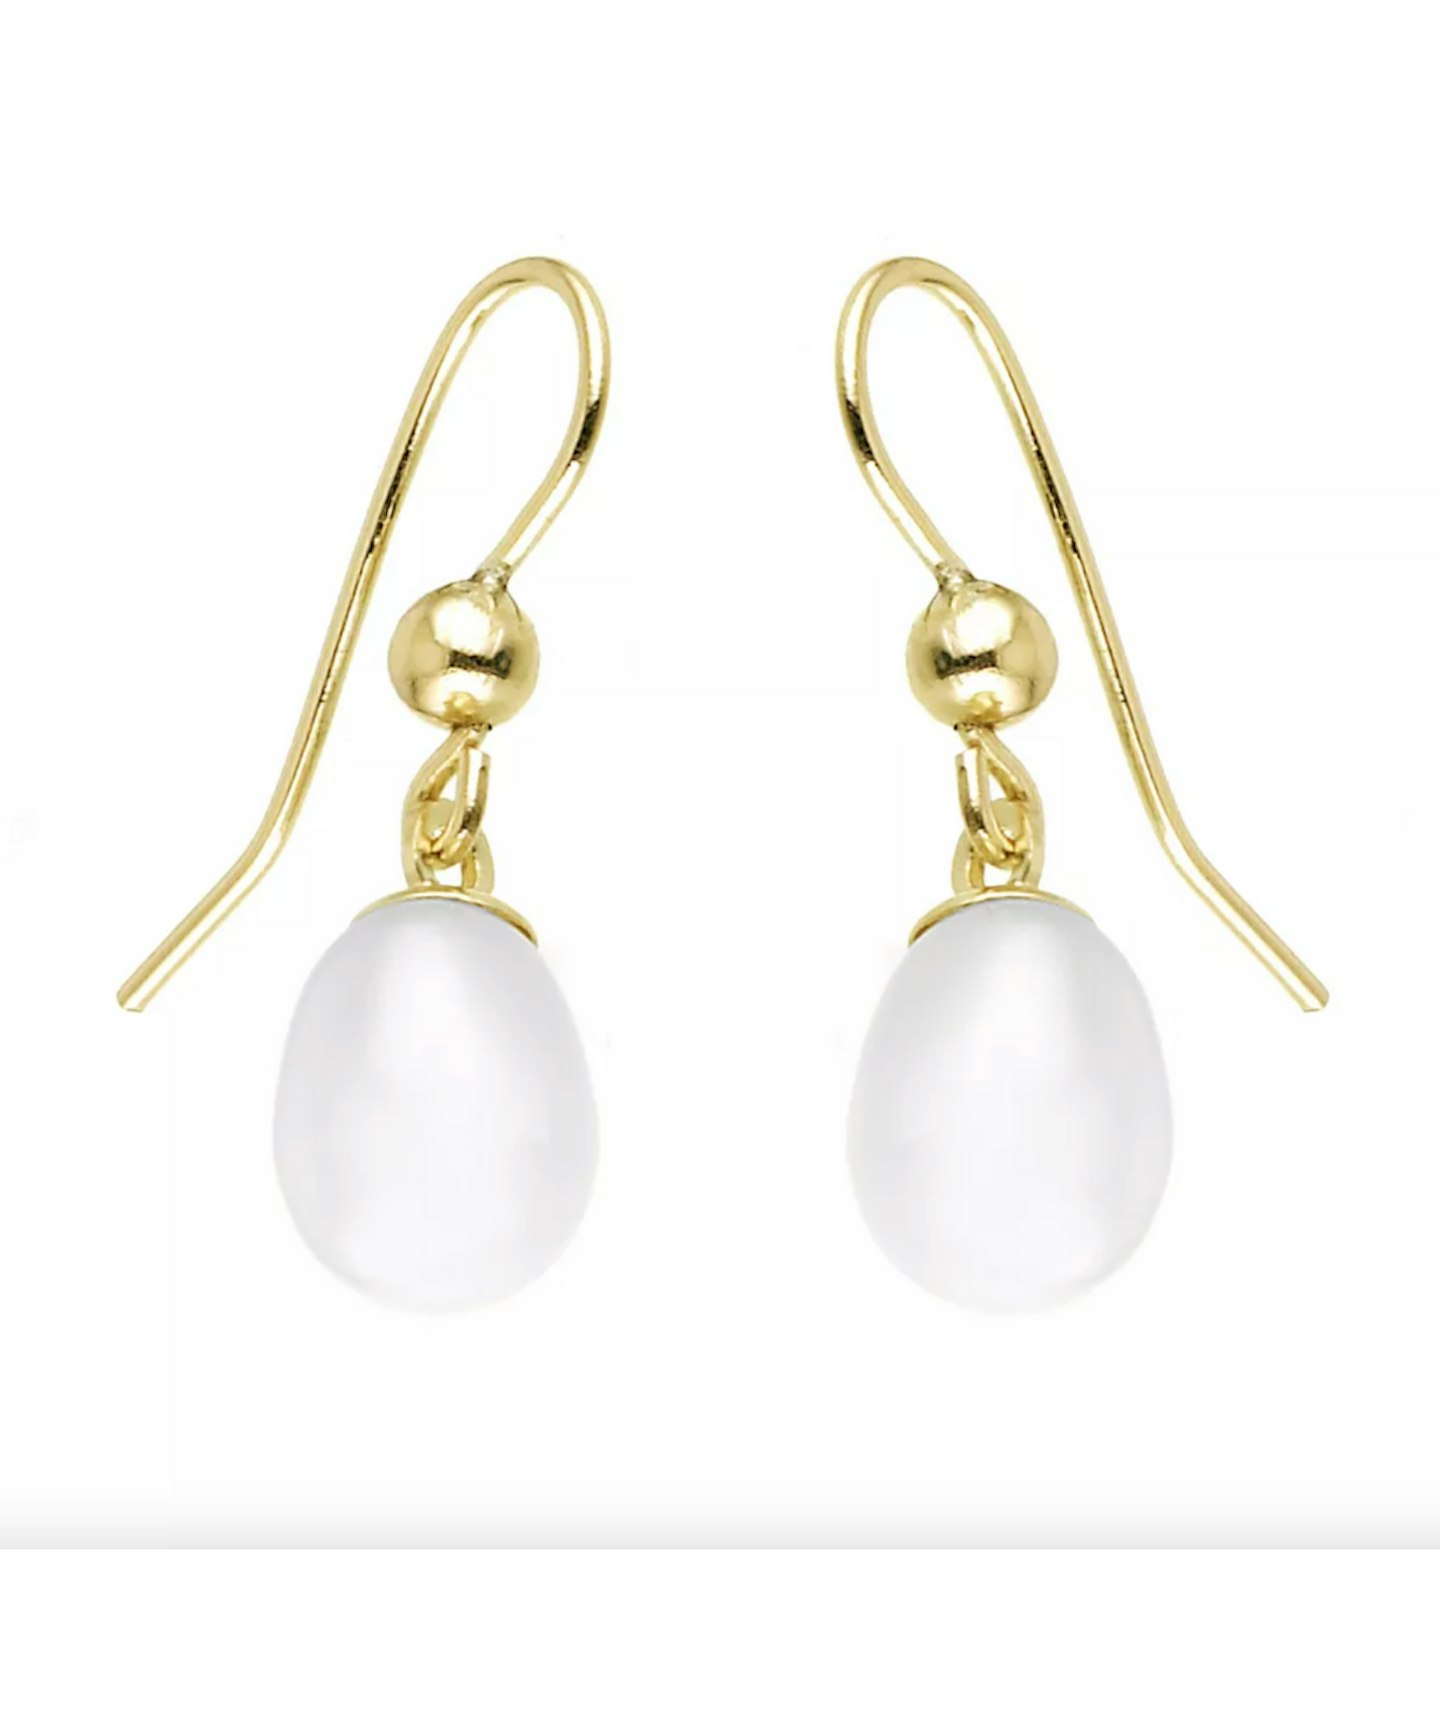 9ct Gold Cultured Freshwater Pearl Drop Earrings